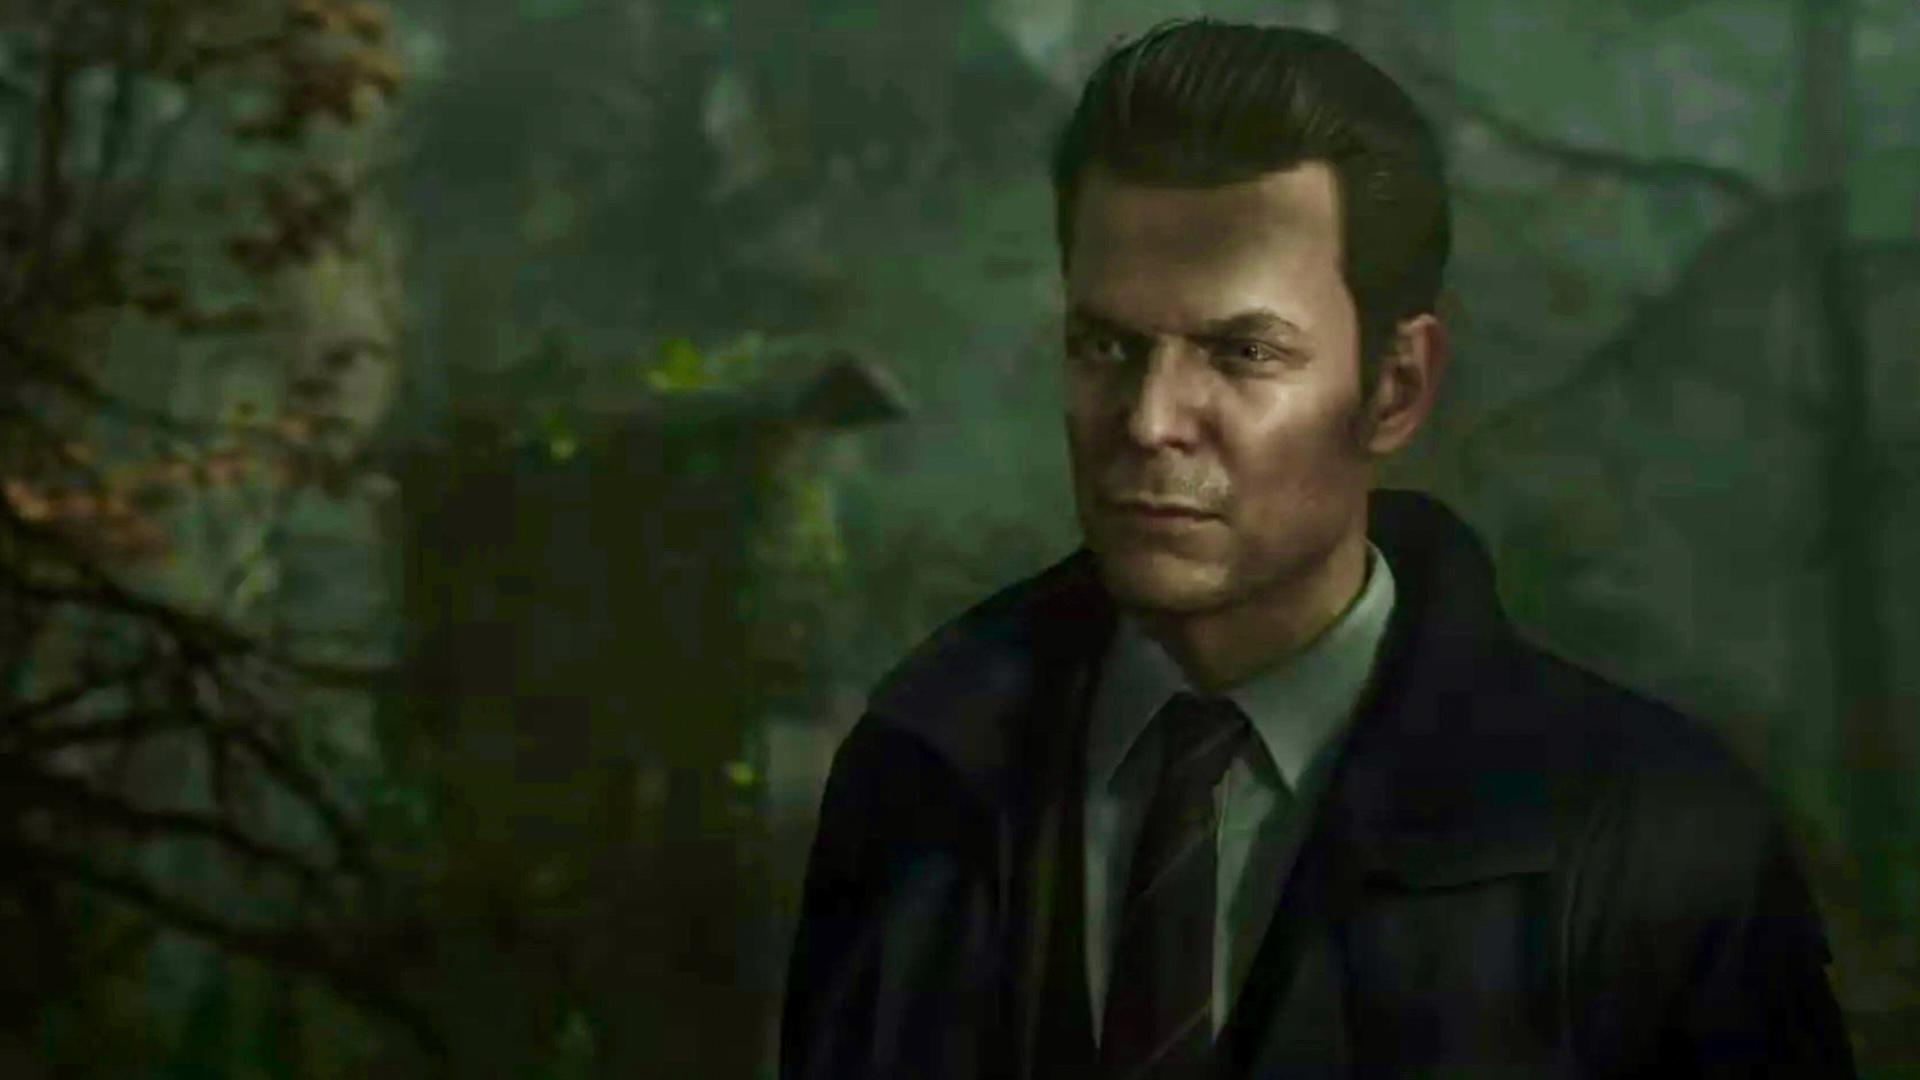 A Max Payne 2 Remedy Sequel Was Never Going to Happen